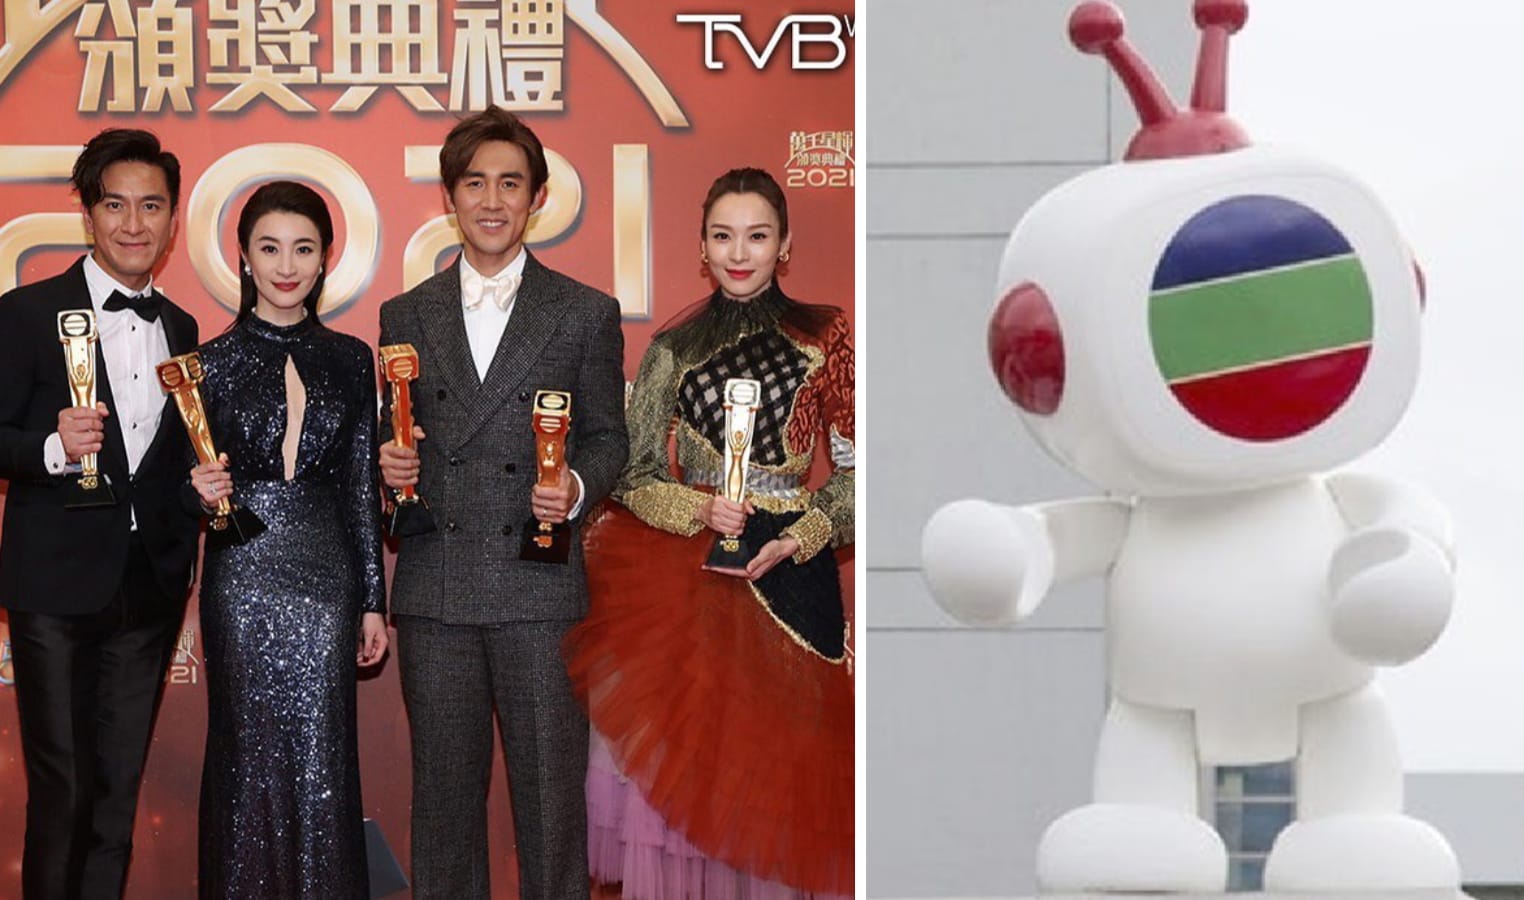 TVB To Lay Off Close To 200 Employees After Suffering An Estimated S$140mil Loss Last Year